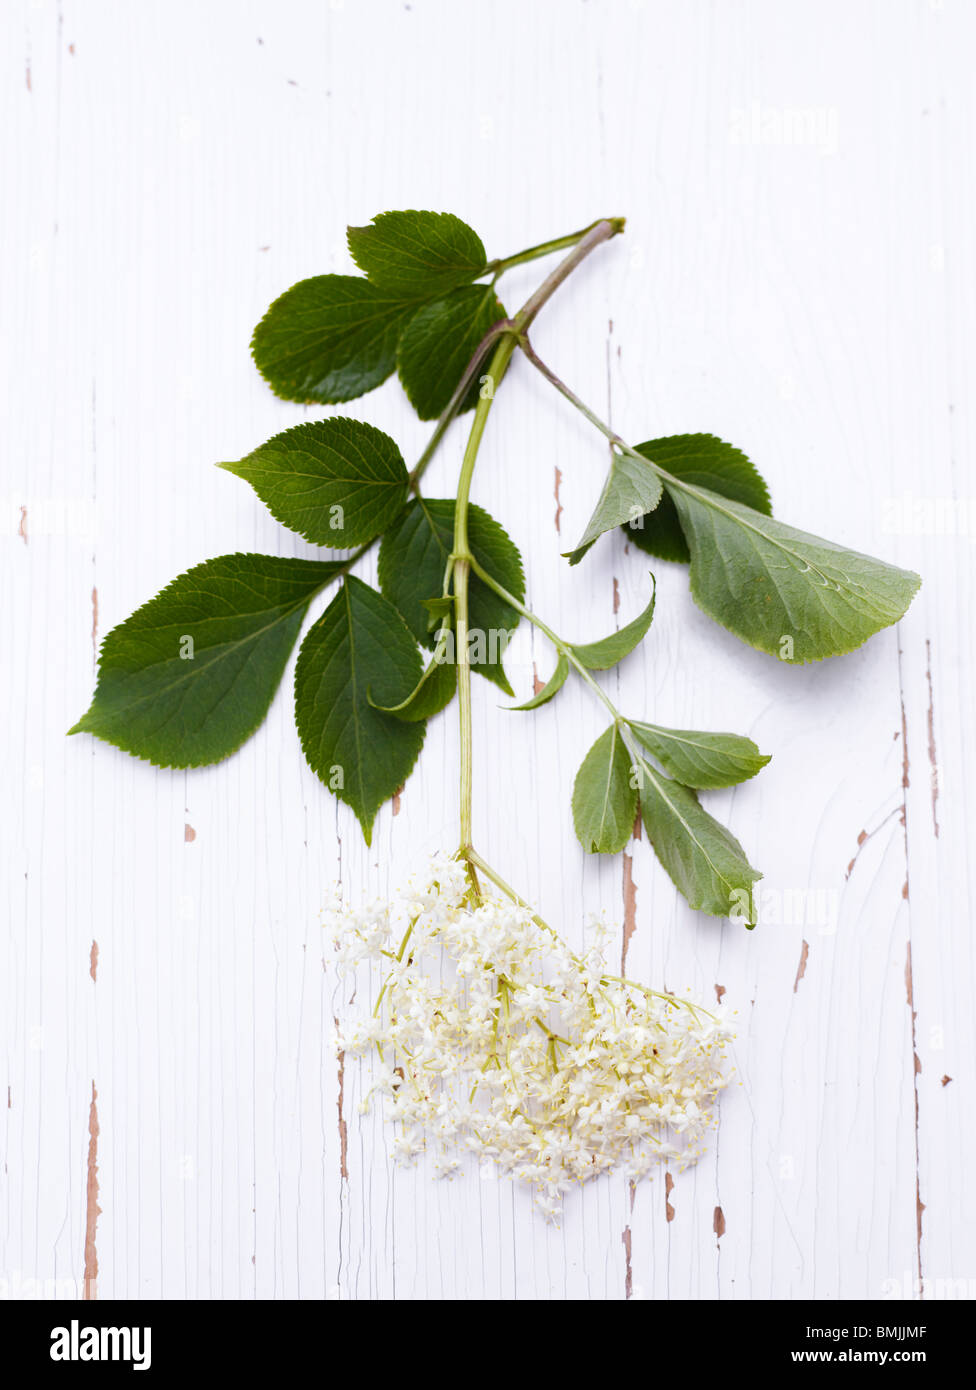 Scandinavia, Sweden, Twig with flowers on wooden background, close-up Stock Photo